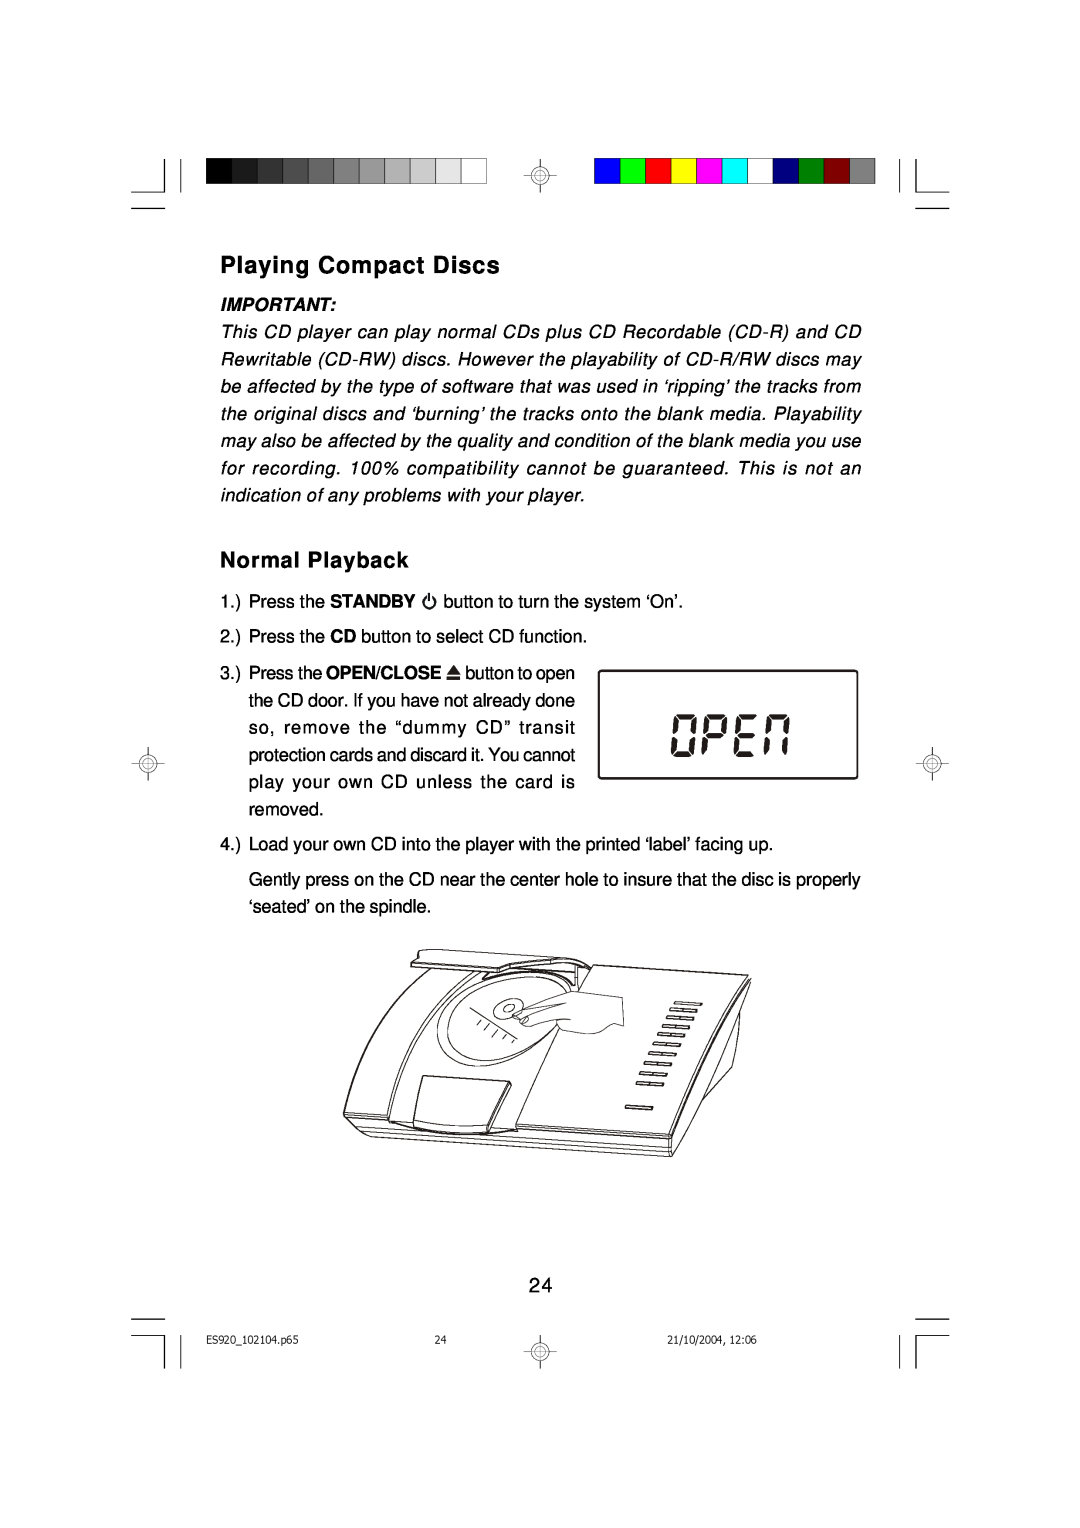 Emerson ES920 owner manual Playing Compact Discs, Normal Playback 